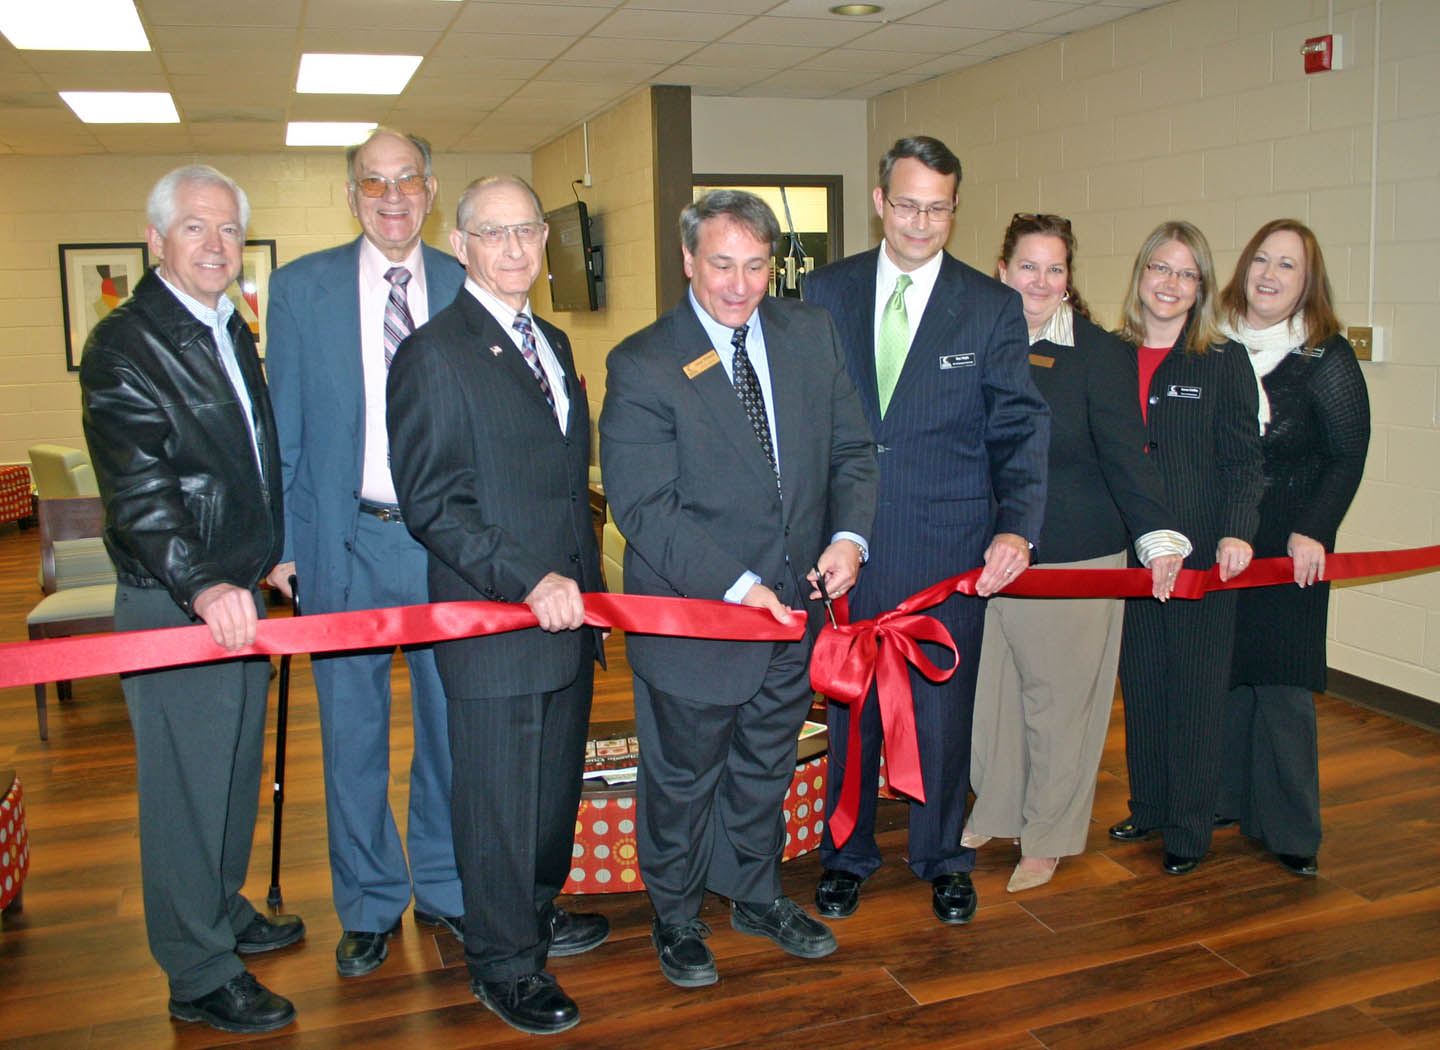 Click to enlarge,  Former and current directors of Central Carolina Community College and Student Services administrators joined CCCC Board of Trustees Chairman Julian Philpott (center, left) in the ribbon-cutting ceremony for the college's new Bell Welcome Center at its Lee County Campus. The Center serves as the college's 'front door,' where new students can receive counseling, assessments, and testing in one location. Joining in the ribbon-cutting were (from left) Dr. Matt Garrett, college president from 2004-2008, who started at the college as associate dean for Student Development in 1985; Hubert Garner, director of Student Services starting in 1965, then dean of Student Development Services from 1971-1991; Avron Upchurch, who started as an instructor in 1962 and retired in 1994 as executive vice president and chief academic officer; Philpott; Ken Hoyle, vice president of Student Services; Jamie Childress, dean of Enrollment Management/Registration; Jamee Stiffler, dean of Admissions ; and Heather Willett, dean of Student Support Services. The Center was created from Bell Hall, which was built in 1973 as the Adult Education Center, the second building on the Lee County Campus. It was renamed in 1975 for Dr. Edwin A. Bell, coordinator of evening programs from 1966 to 1973. He was the first person to have one of the college's buildings named after him. CCCC President Dr. Bud Marchant was out of town for a conference and unable to attend the ribbon cutting. For more information about services offered by the Student Services Division, go to www.cccc.edu/studentservices/. 